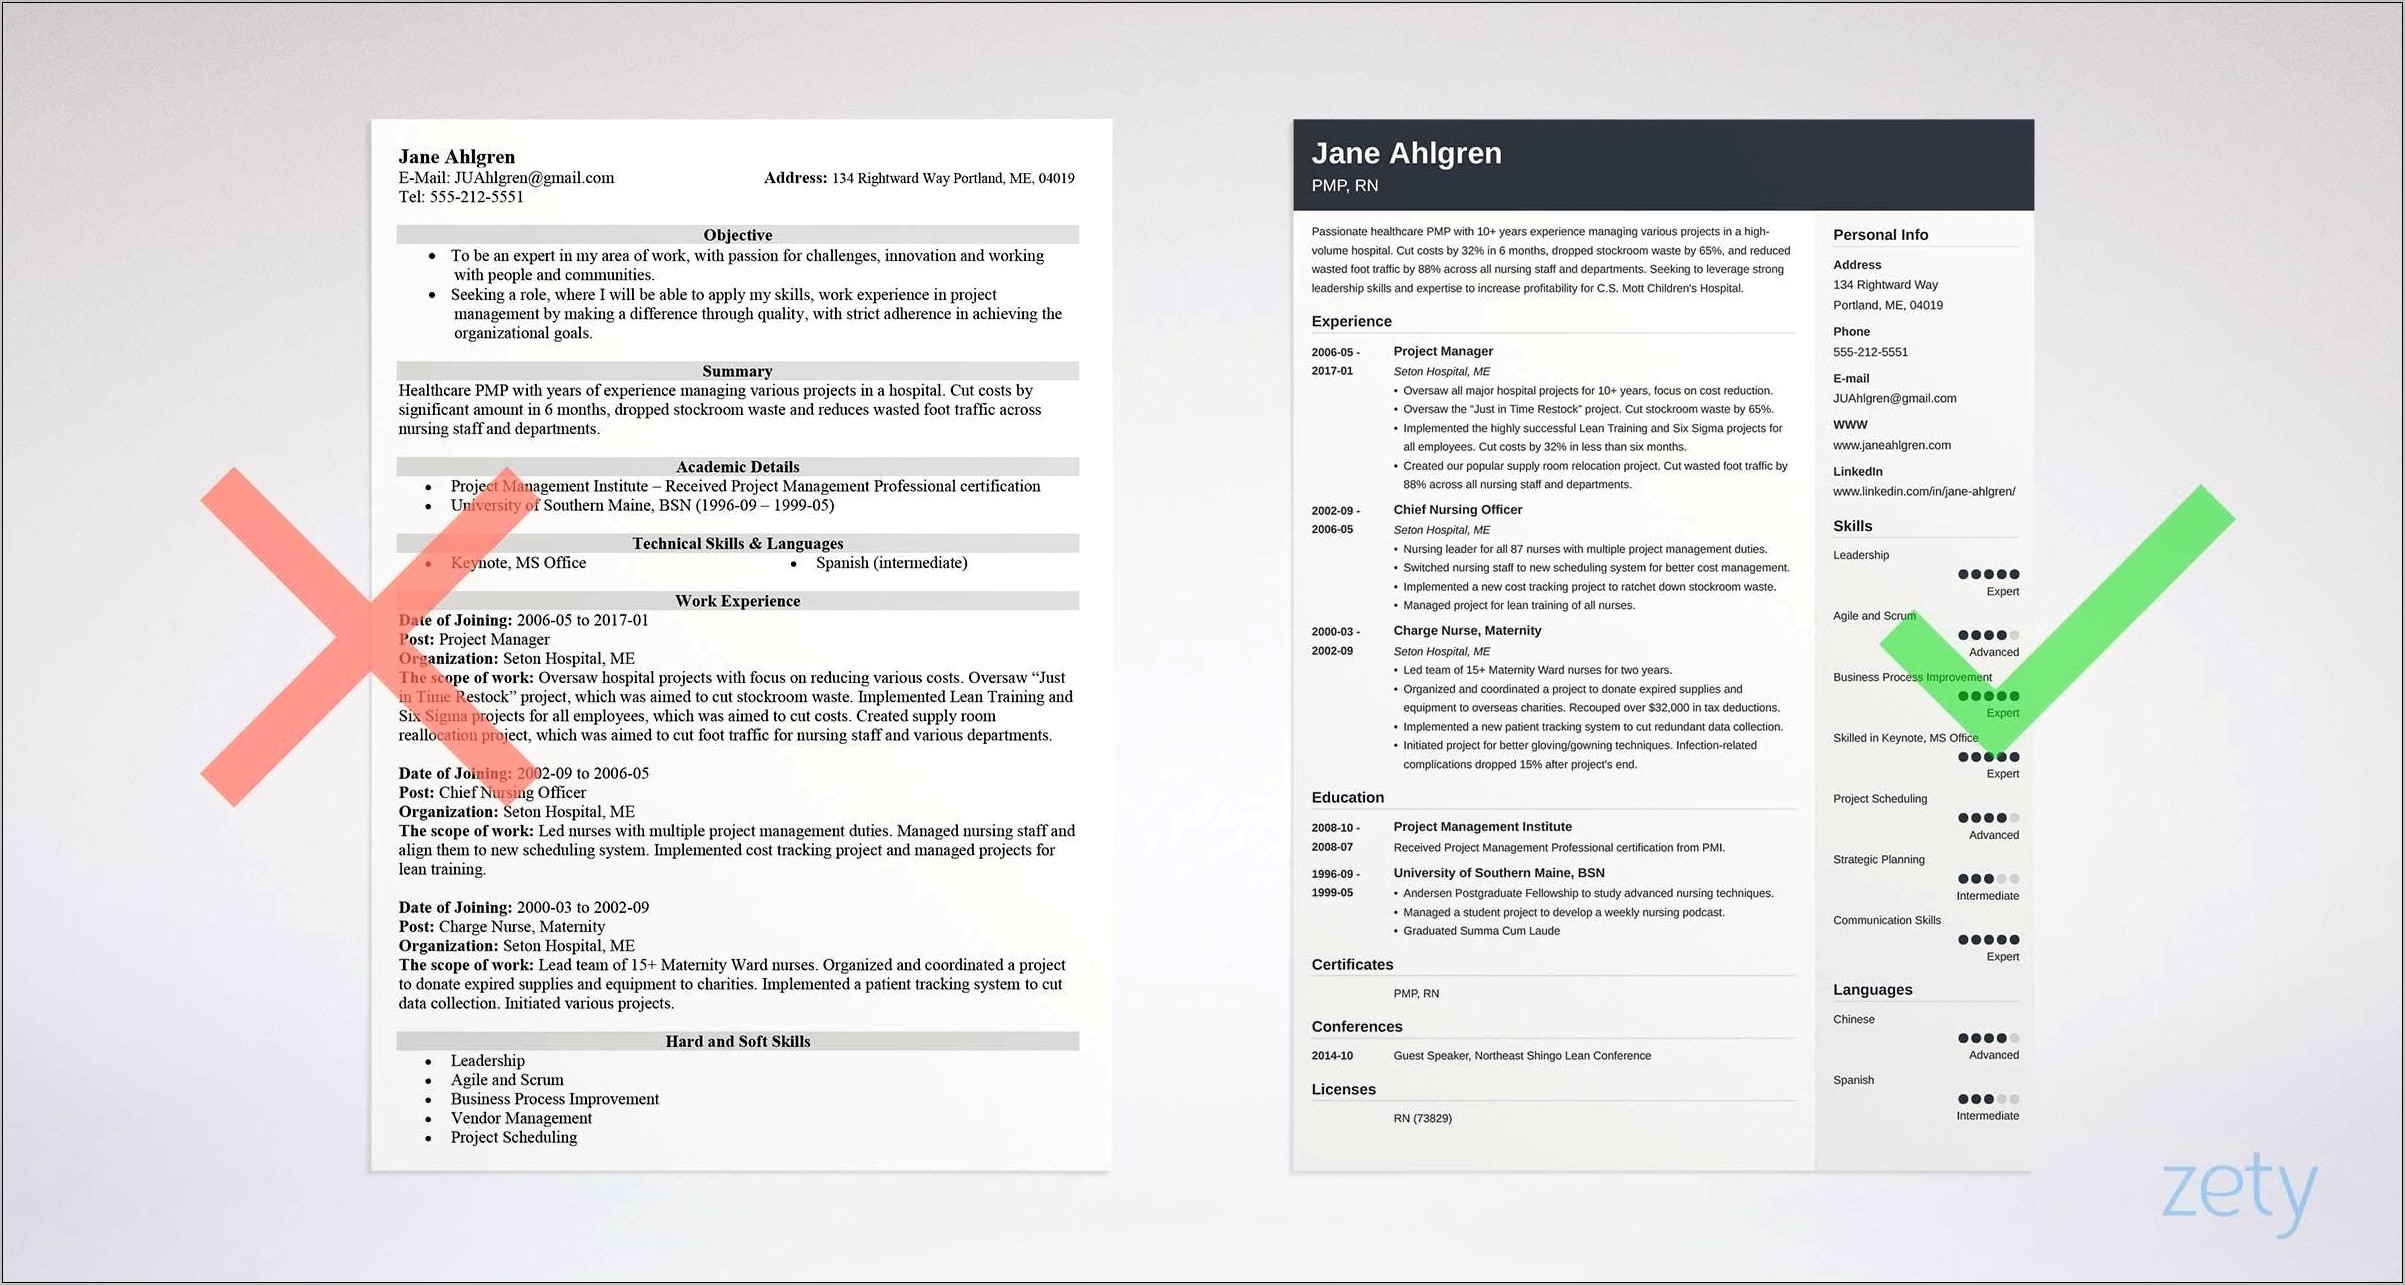 Profile Sections Of Resume Examples